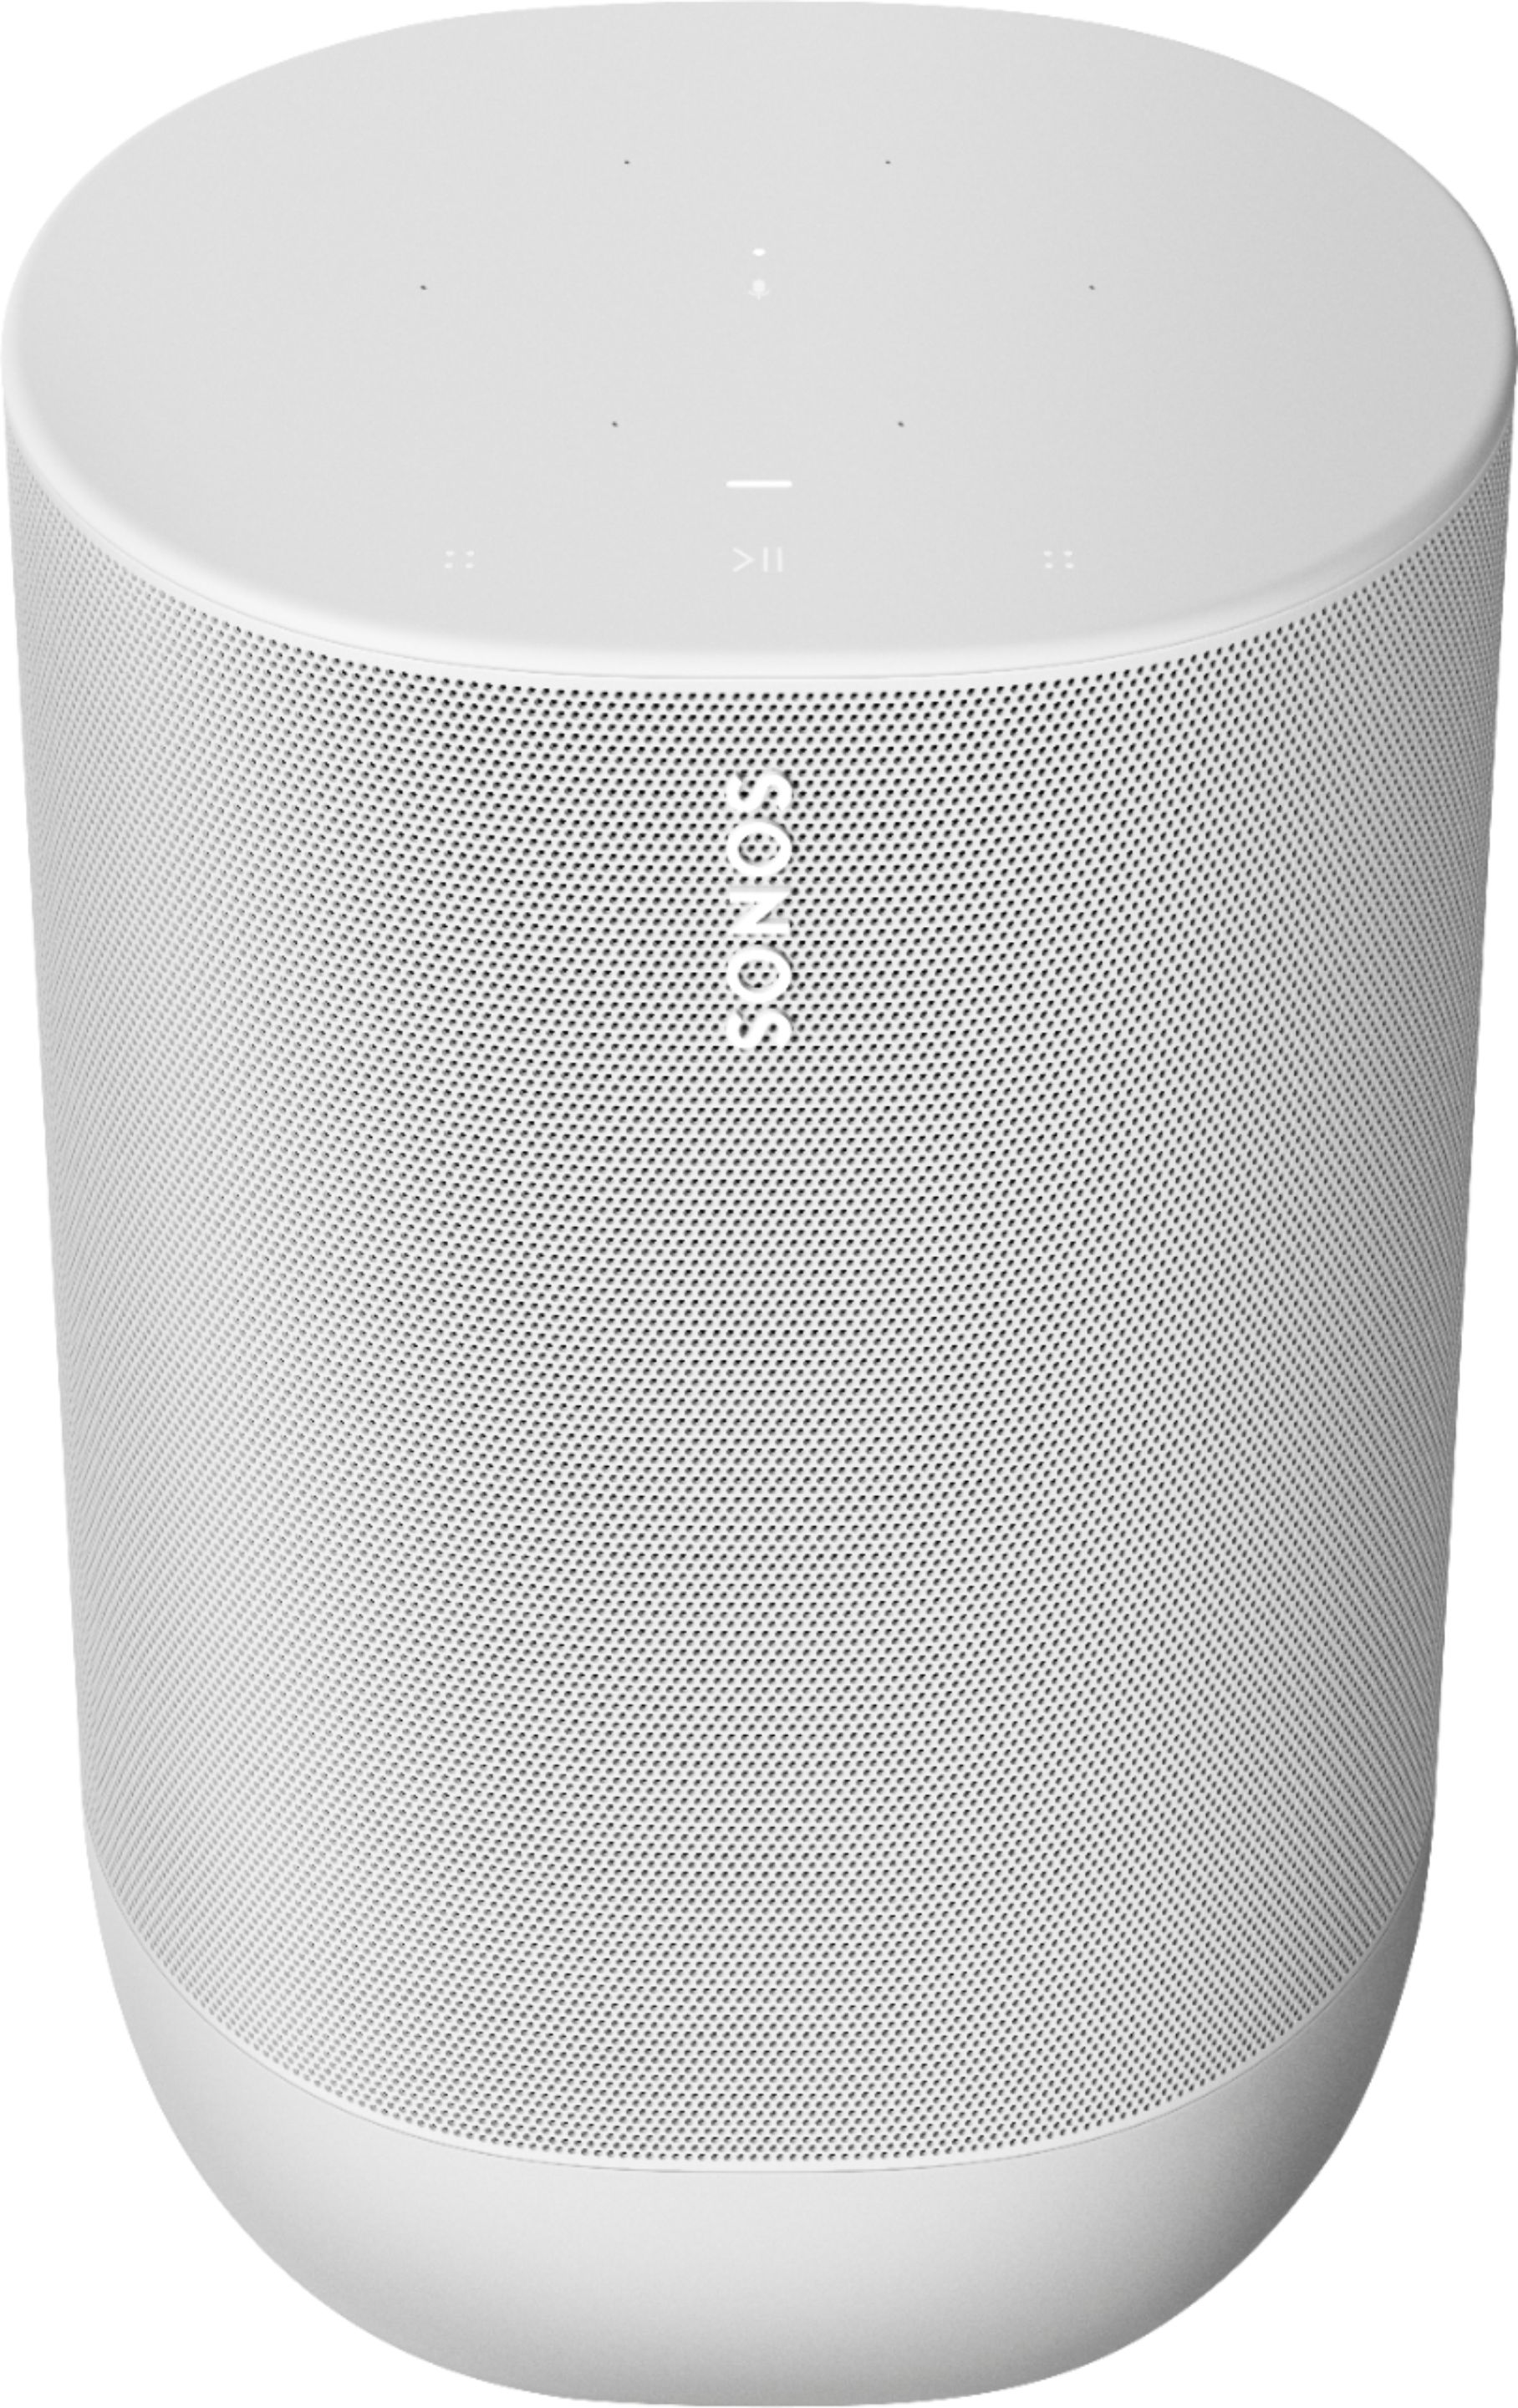 Angle View: Sonos - Move Smart Portable Wi-Fi and Bluetooth Speaker with Alexa and Google Assistant - White